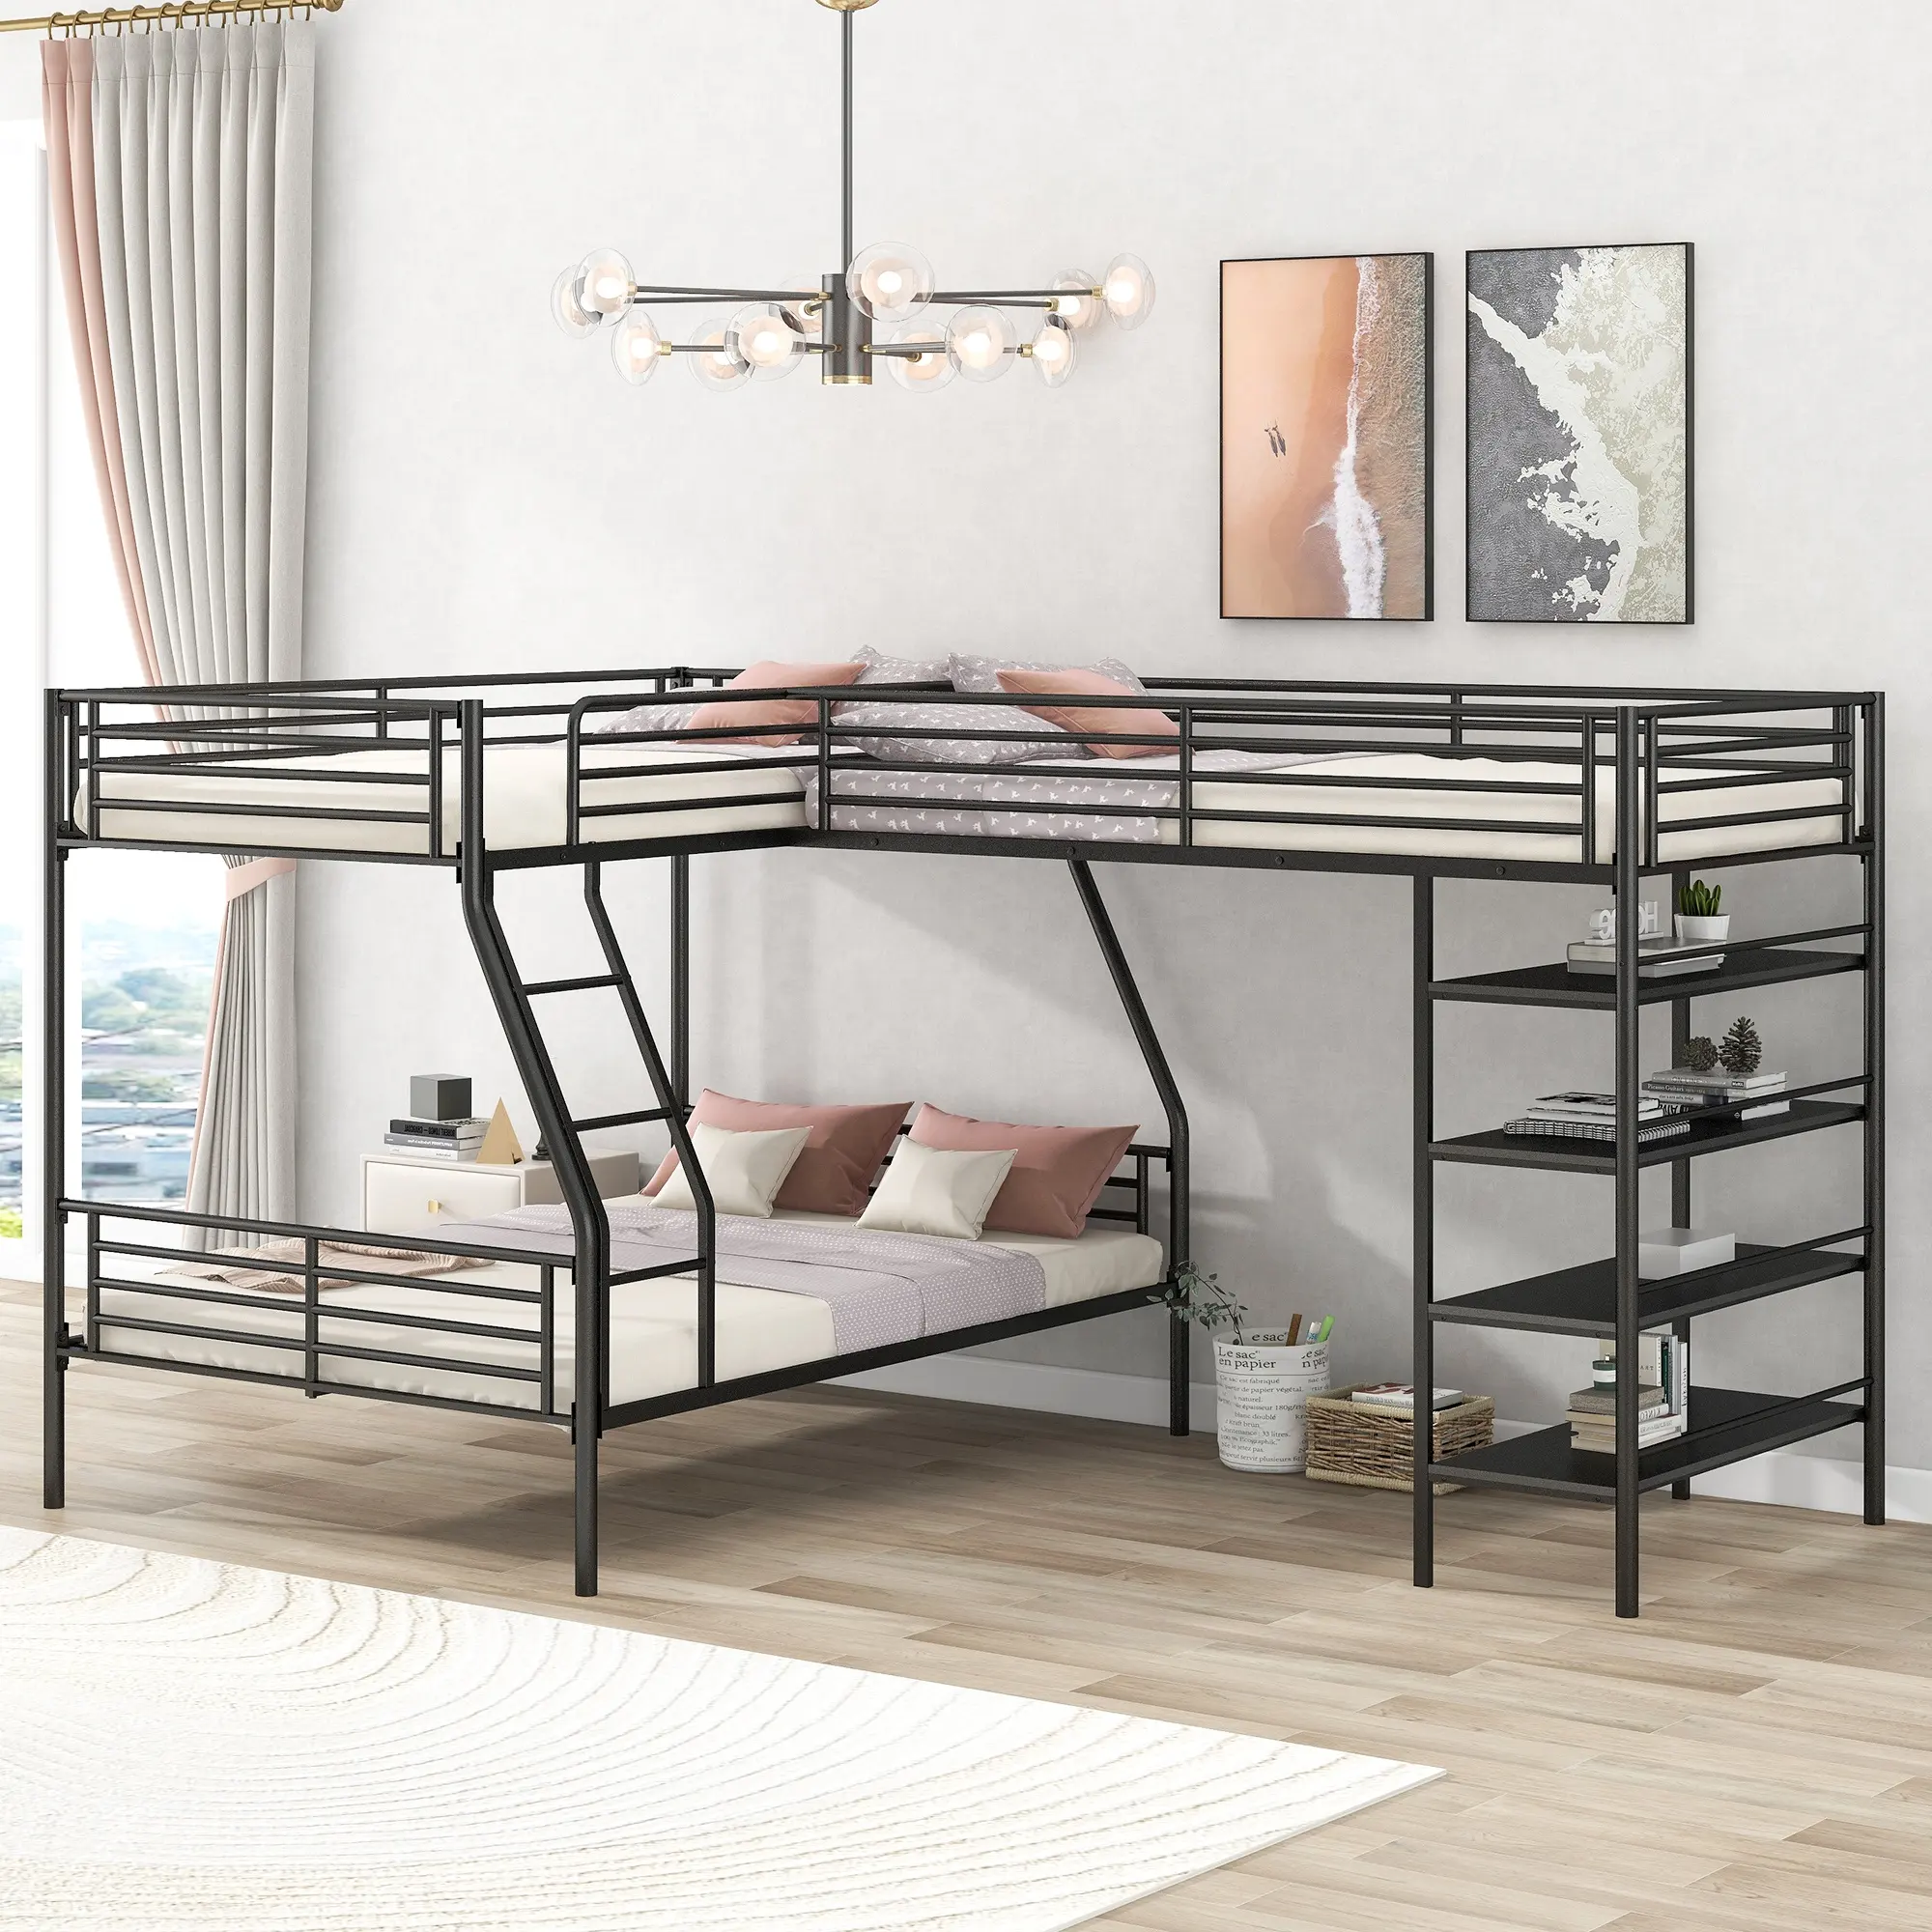 Bellemave home furniture widen metal triple bunk bed with storage racks and stairs metal bunk bed frame